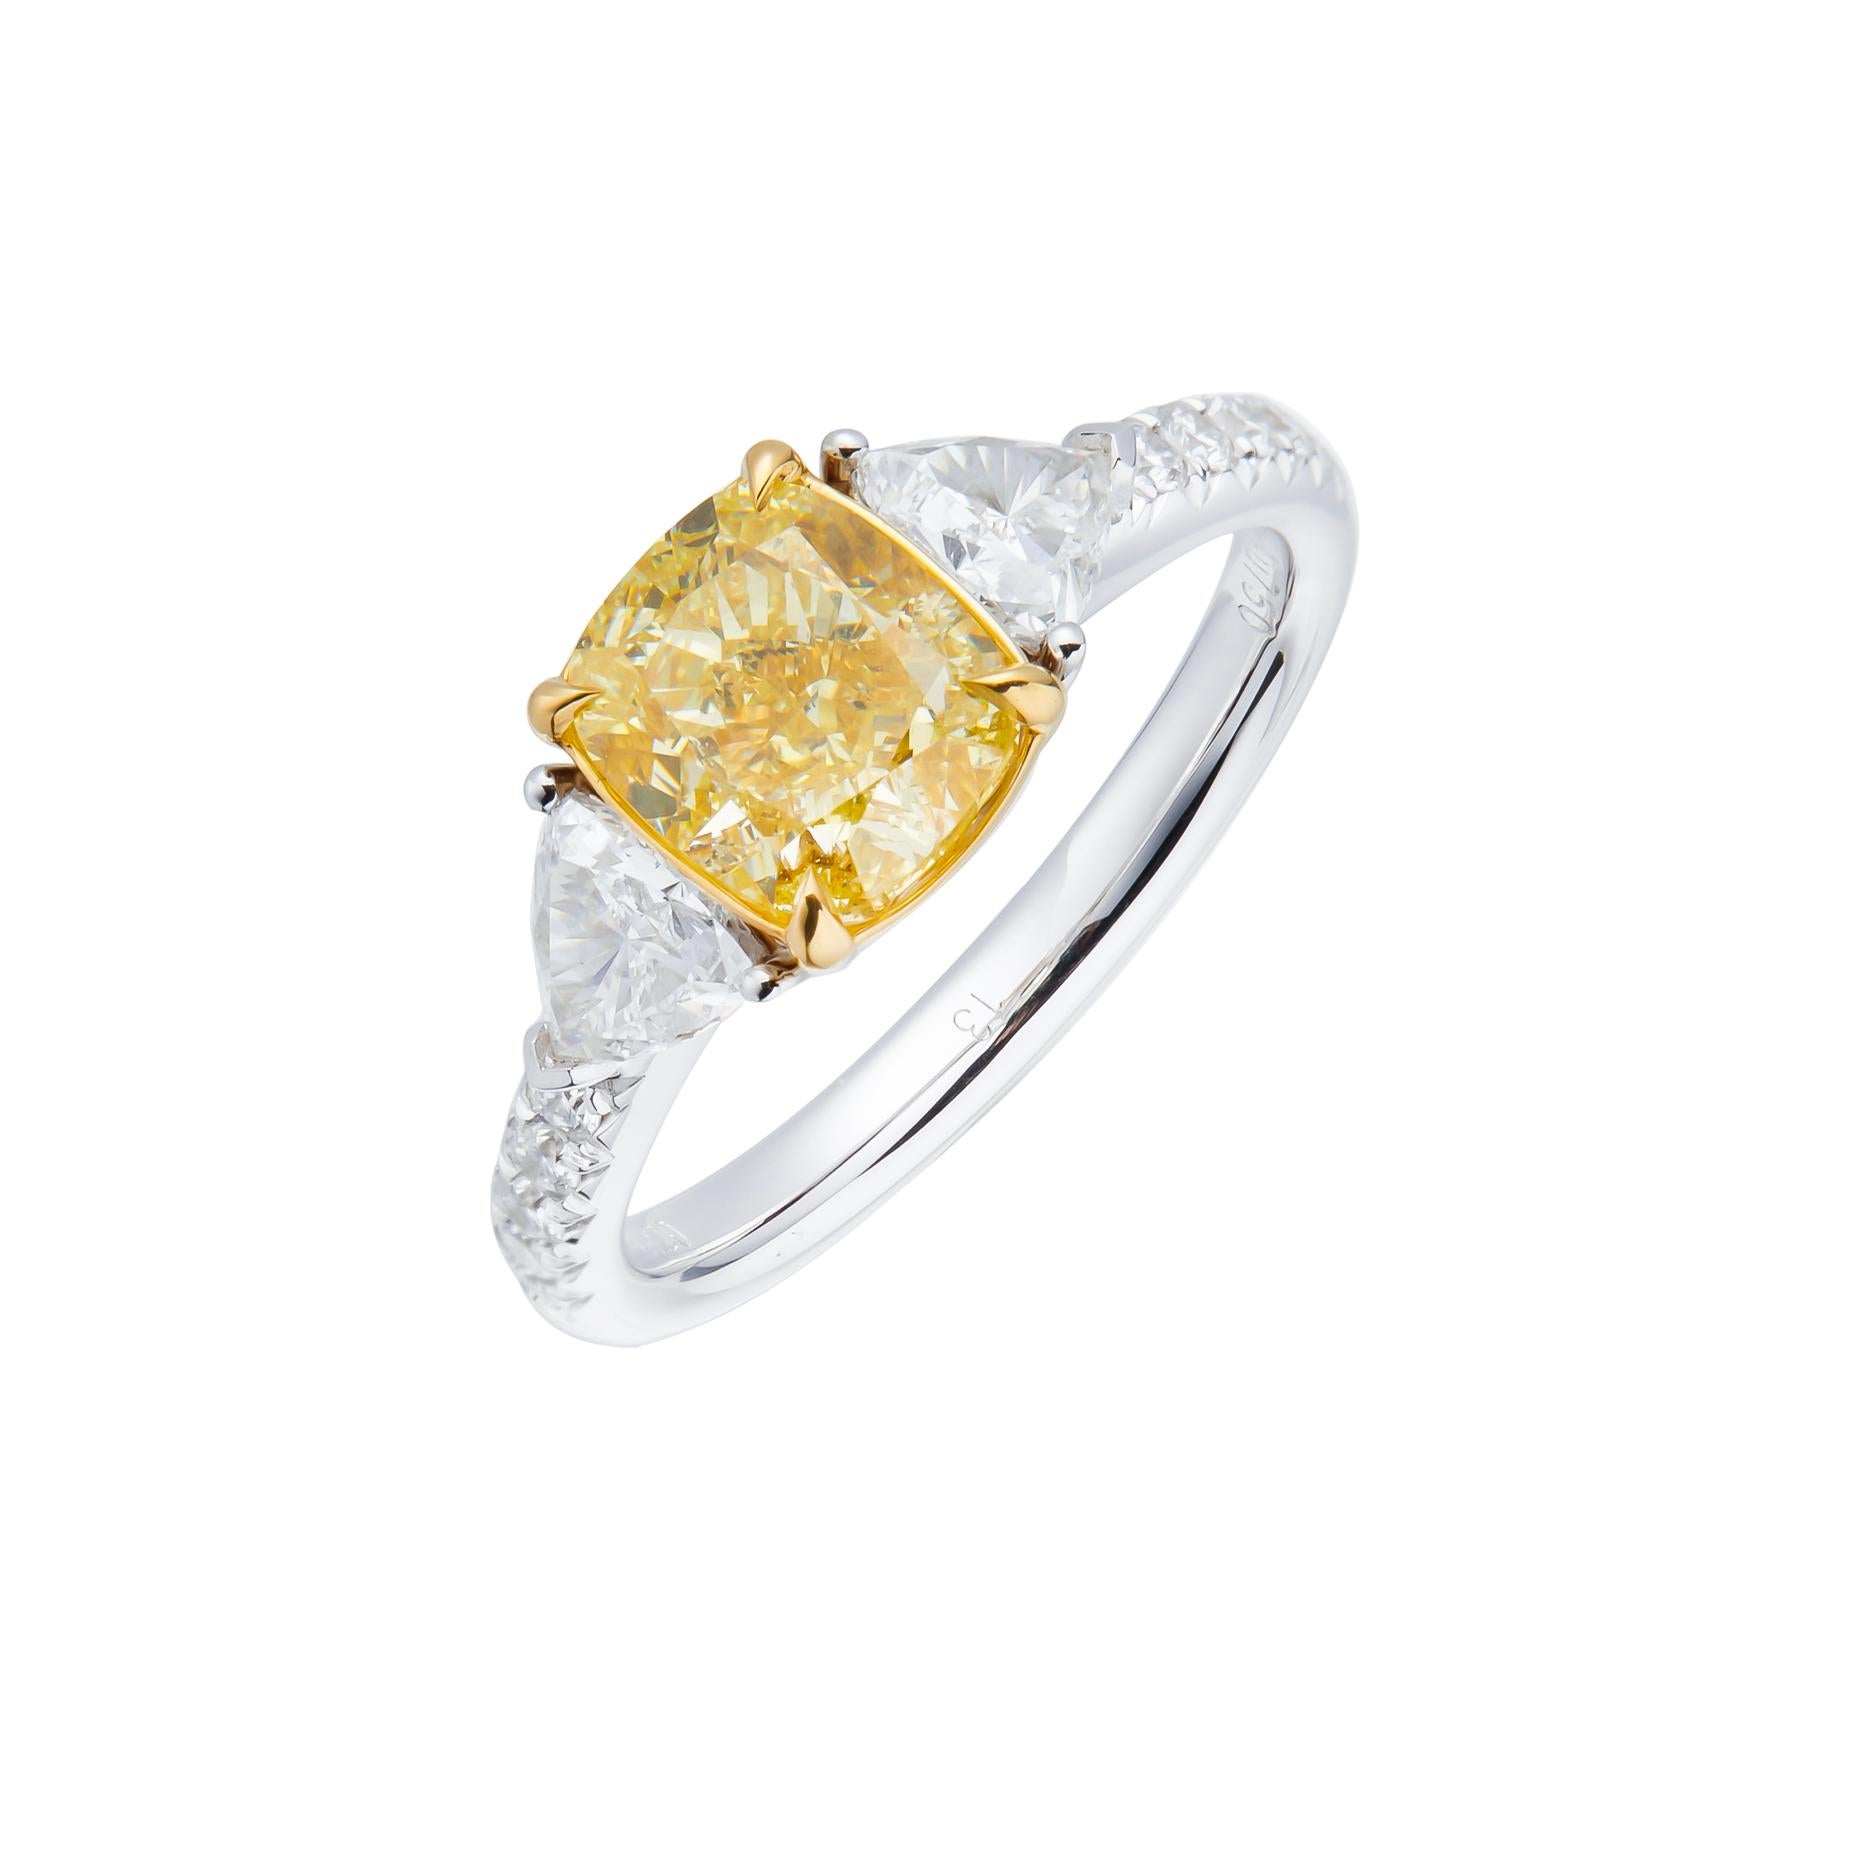 Elevate your jewelry collection with a true marvel of nature's artistry – a GIA certified 2.03 carat fancy light yellow cushion cut natural diamond. Set against the backdrop of a luxurious 18kt gold band, this exquisite piece exudes a sense of